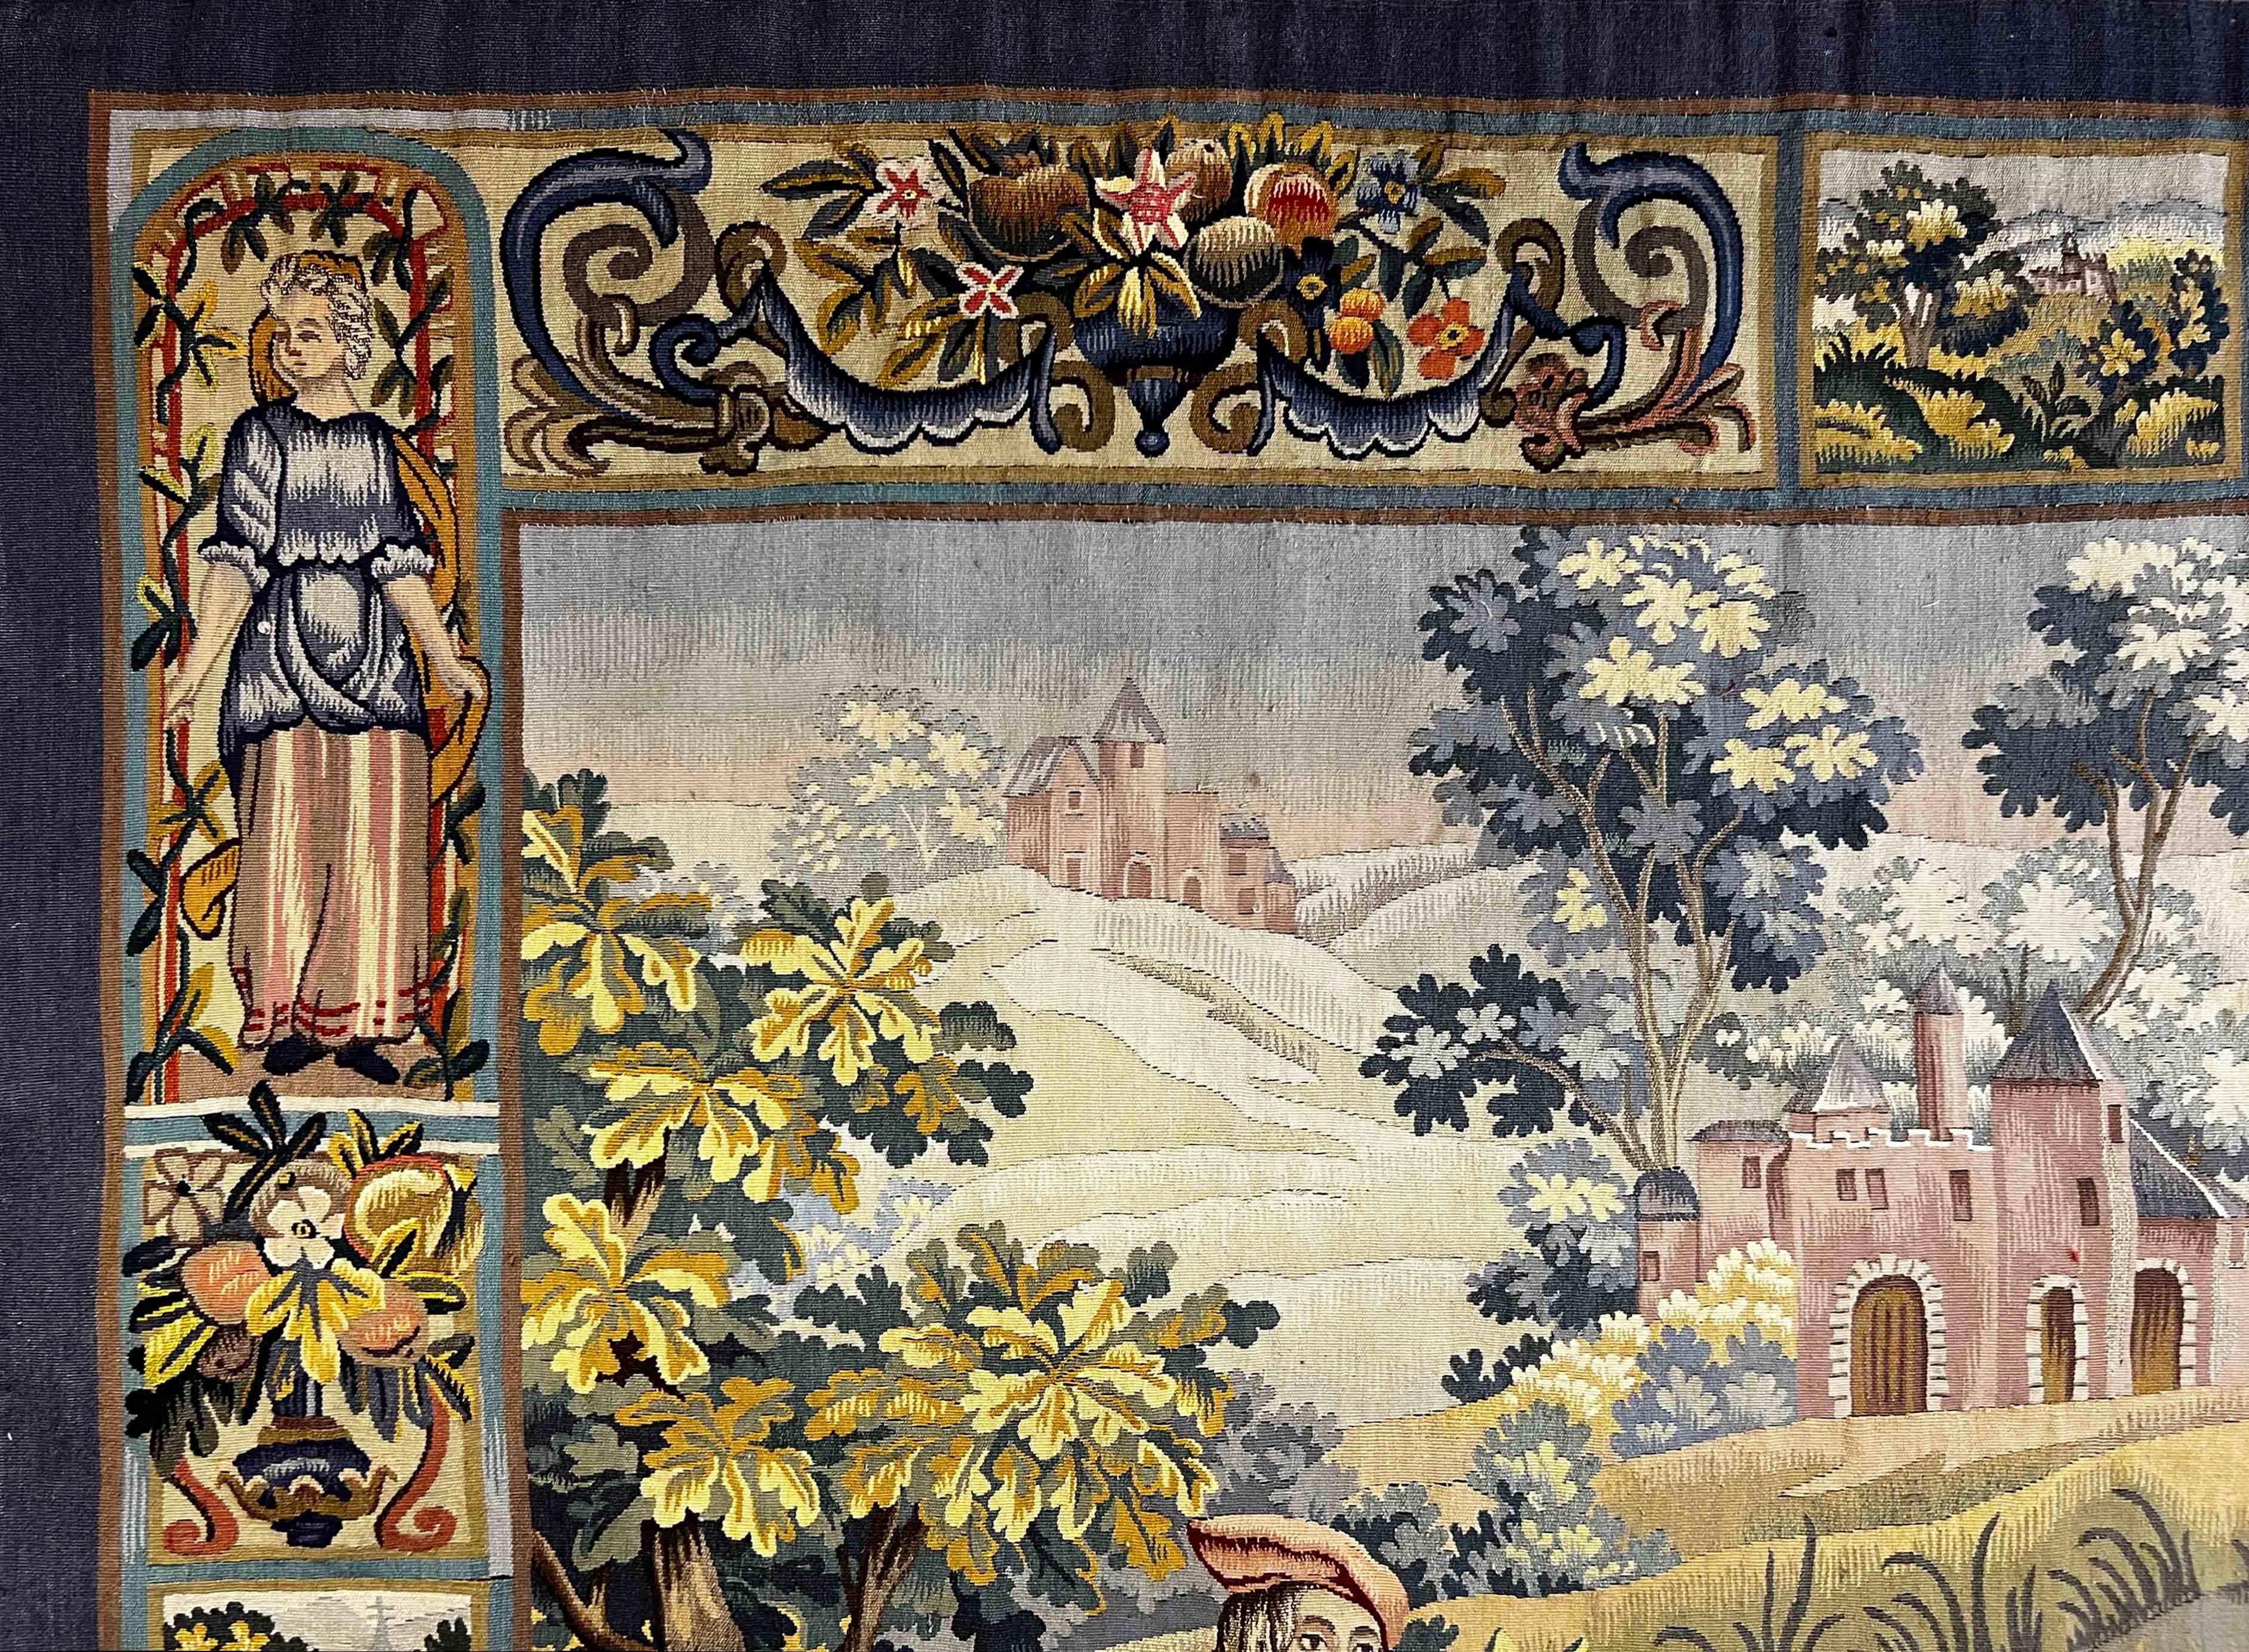 Hand-Woven Tapestry 19th Century Aubusson King Ride on Horseback, N°1206 For Sale